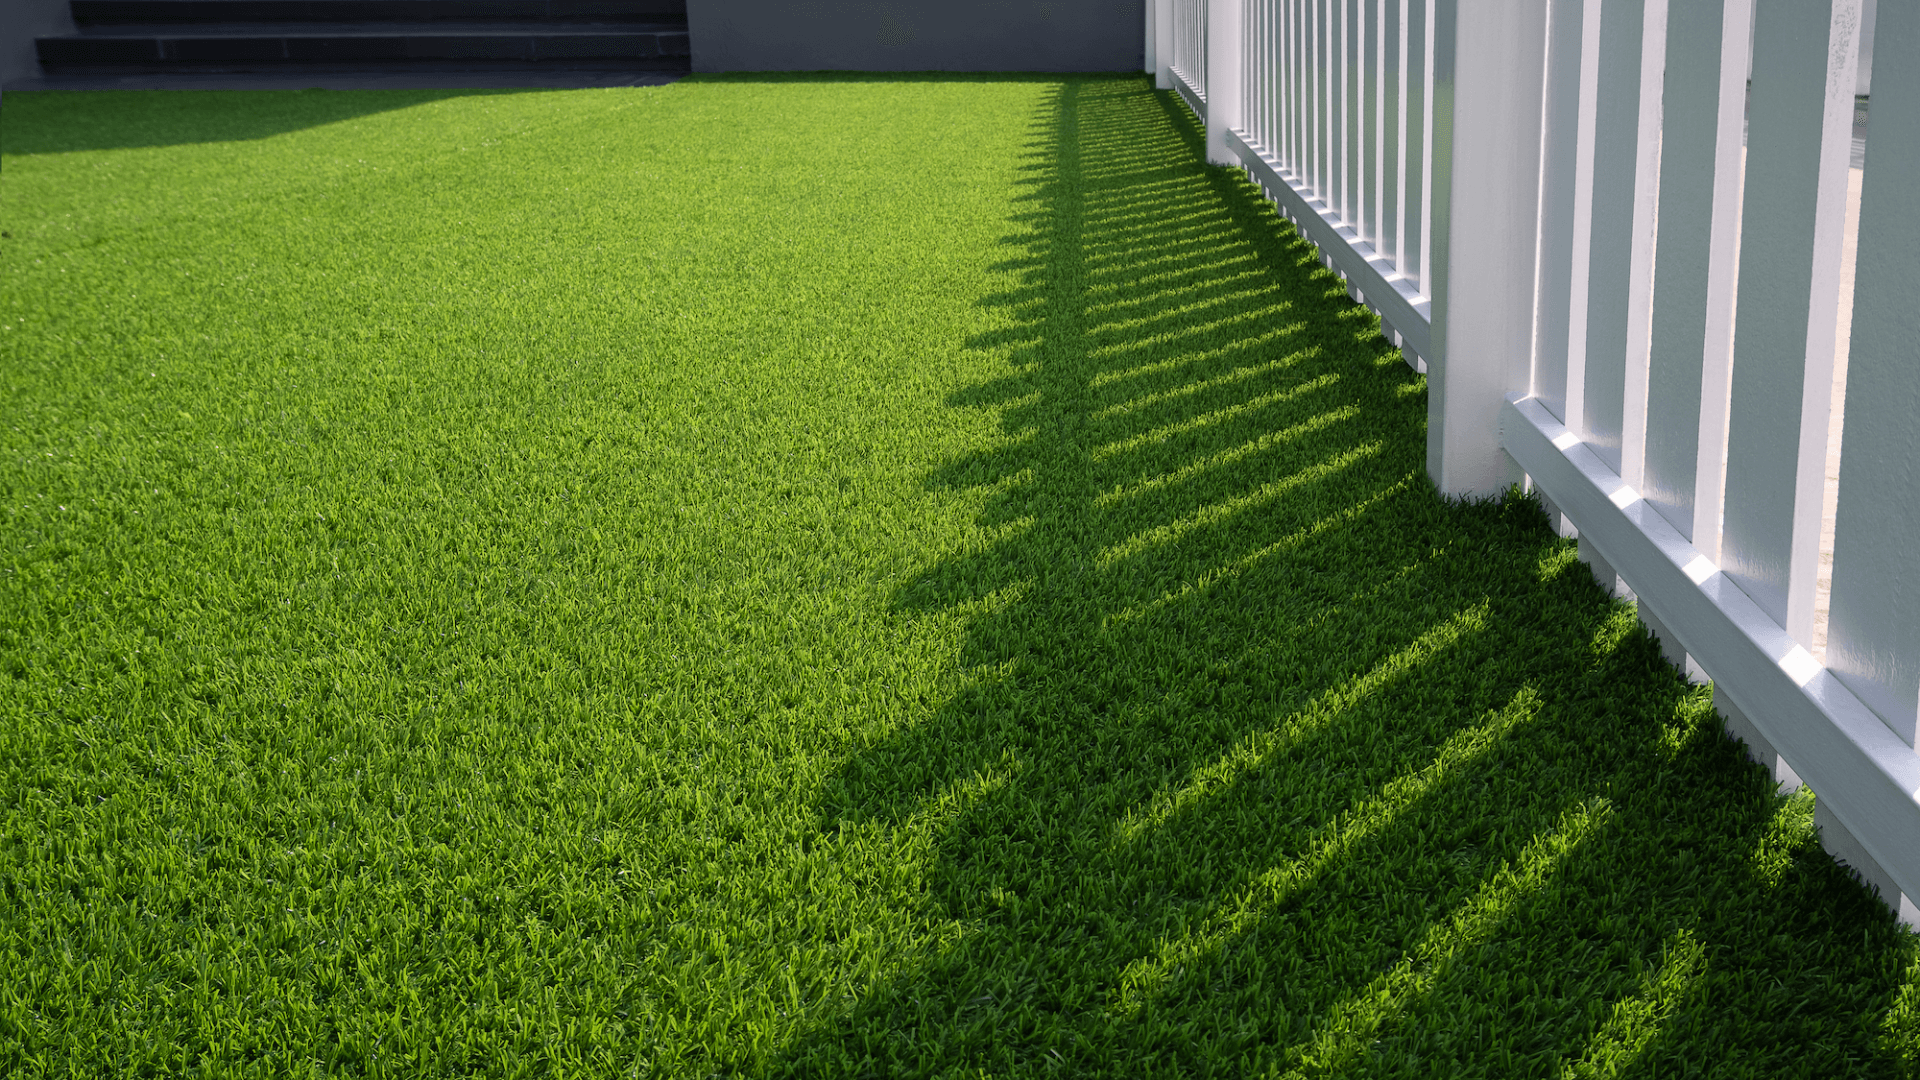 this backyard artificial turf in Scottsdale AZ is reflecting sunlight